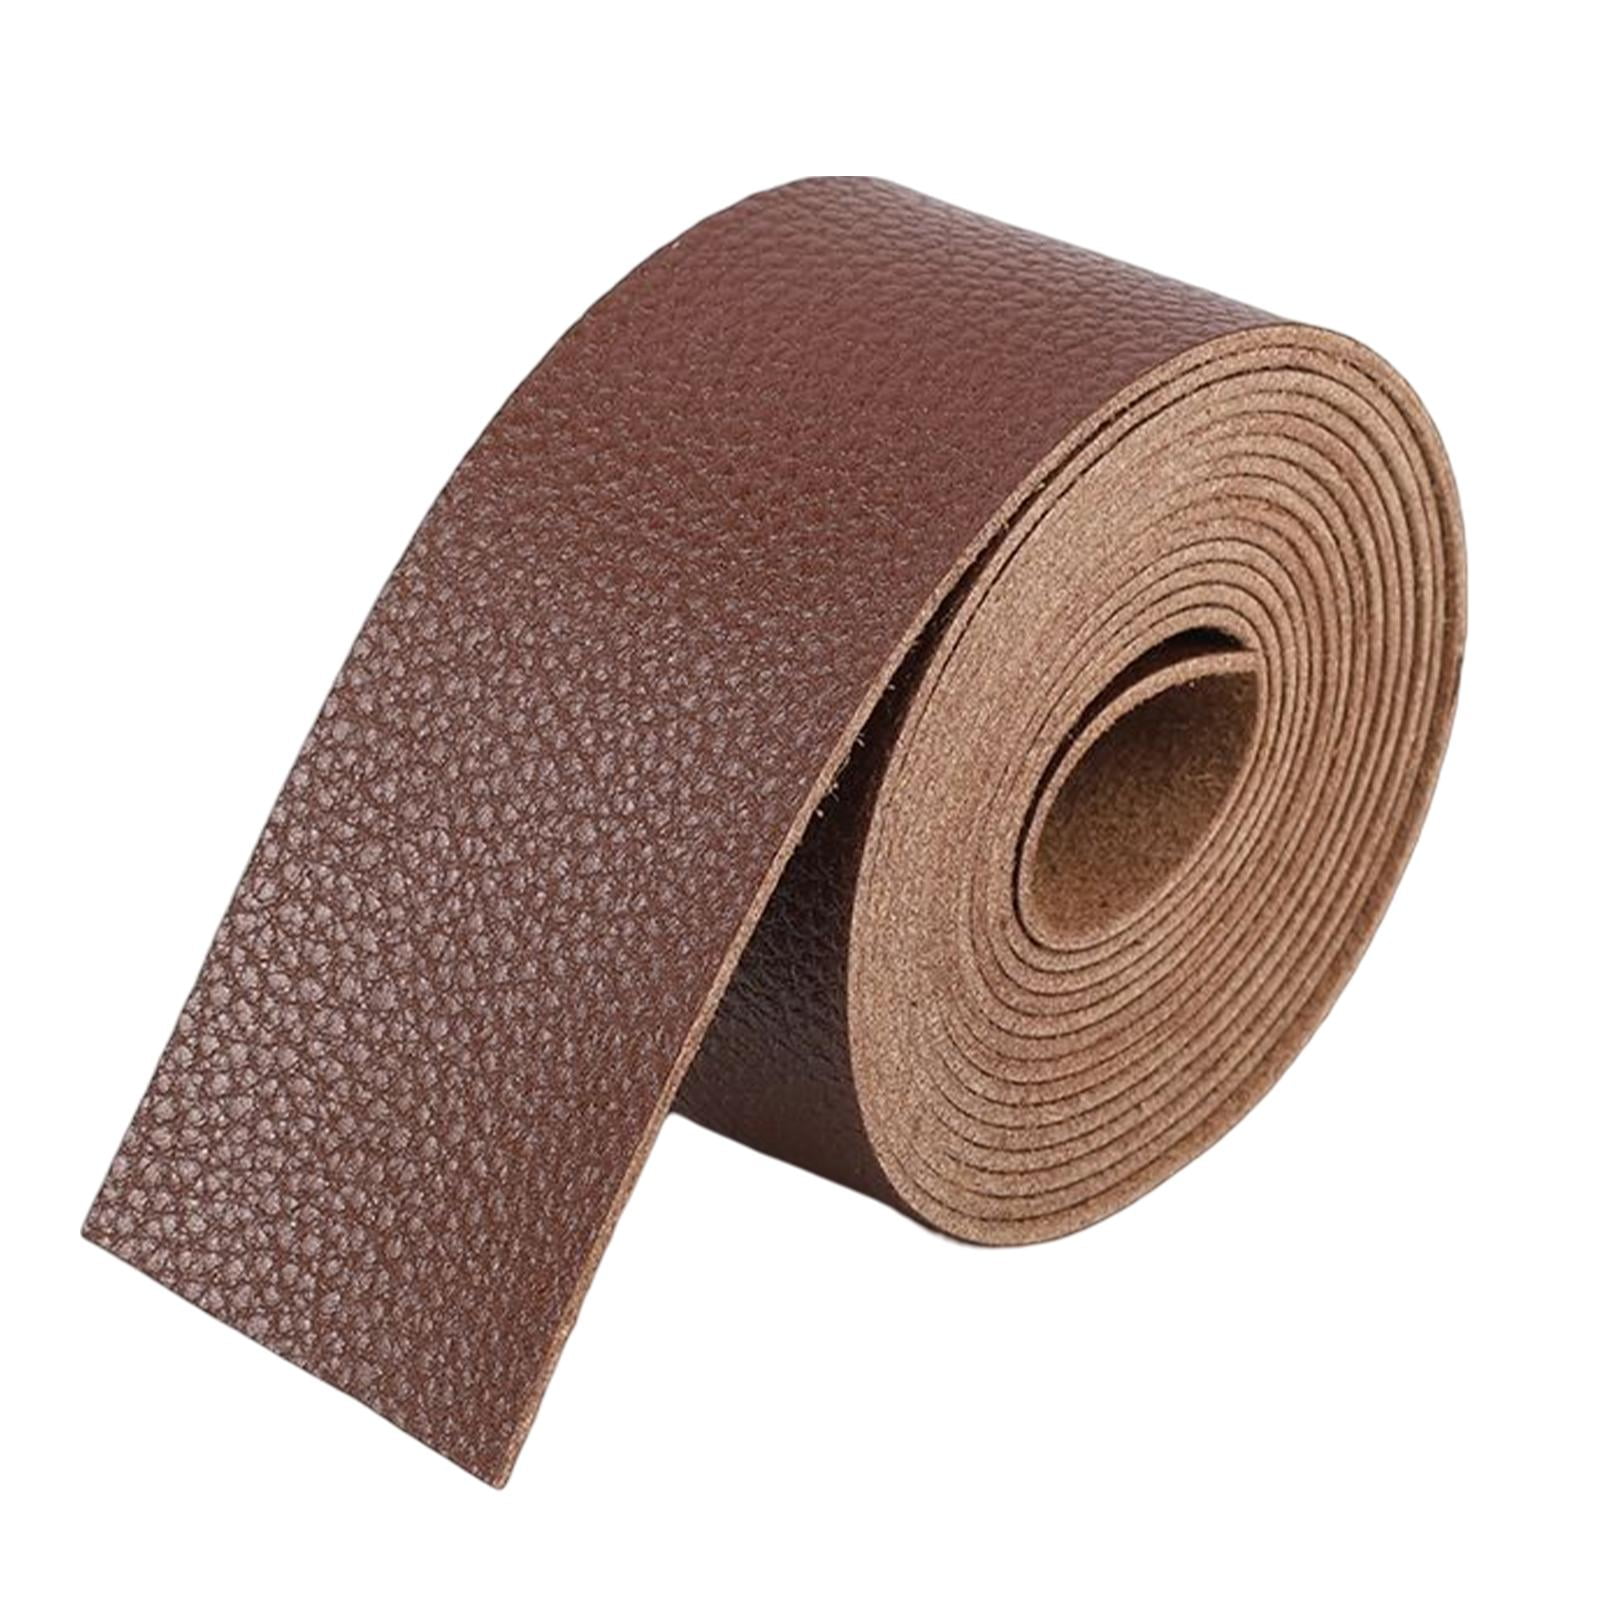 Hide & Drink Leather Strap 1/4 Wide, 1.8mm Thick 48 / Bourbon Brown